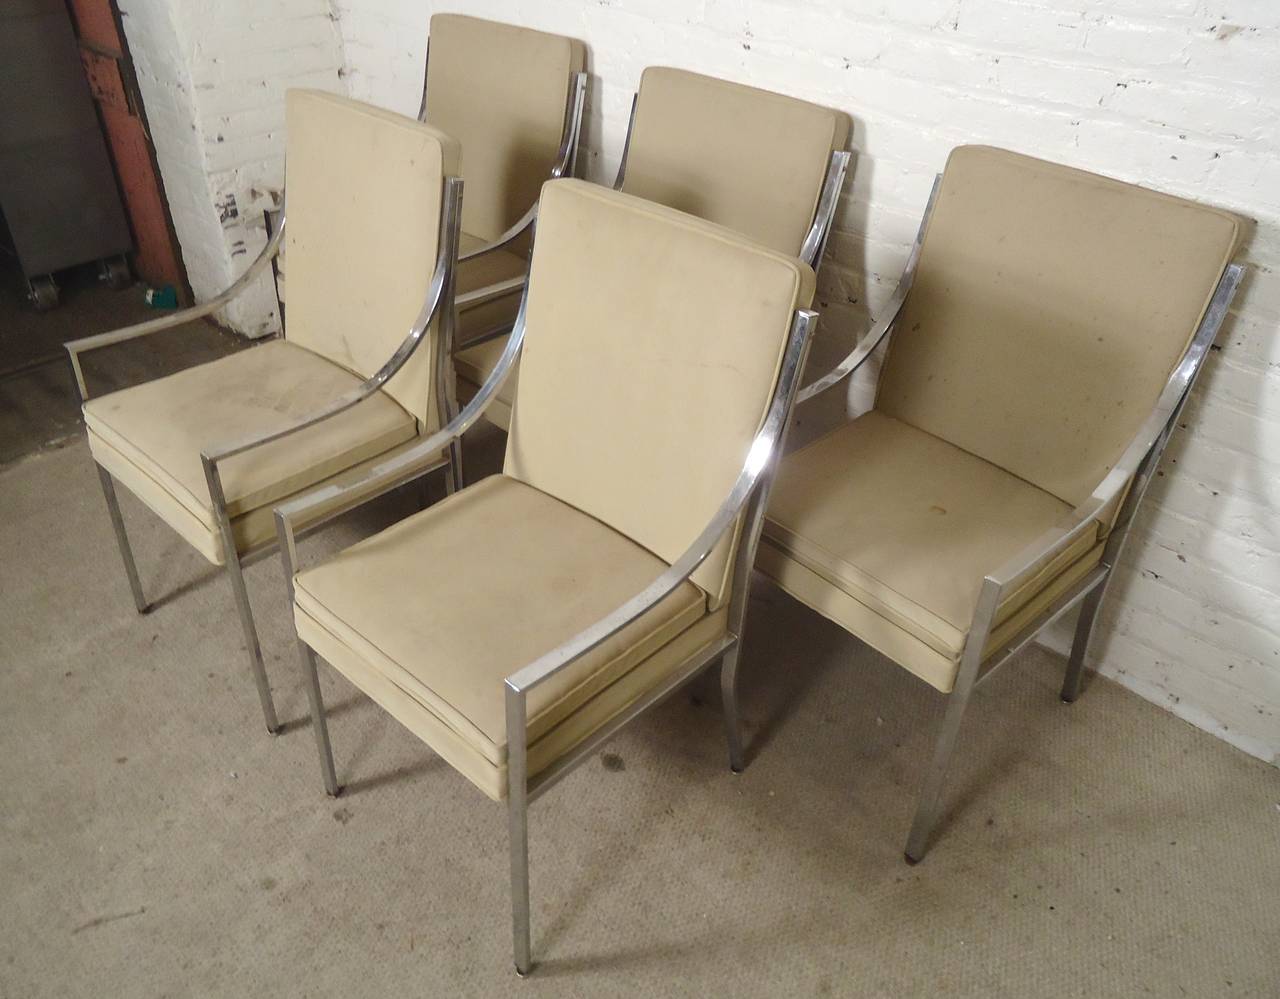 Single polished chrome frame chair with swooping arms and angled back legs. Great strong form, ideal for dinning table or as a single side chair.
PRICE IS FOR SINGLE CHAIR - 5 available

(Please confirm item location - NY or NJ - with dealer)